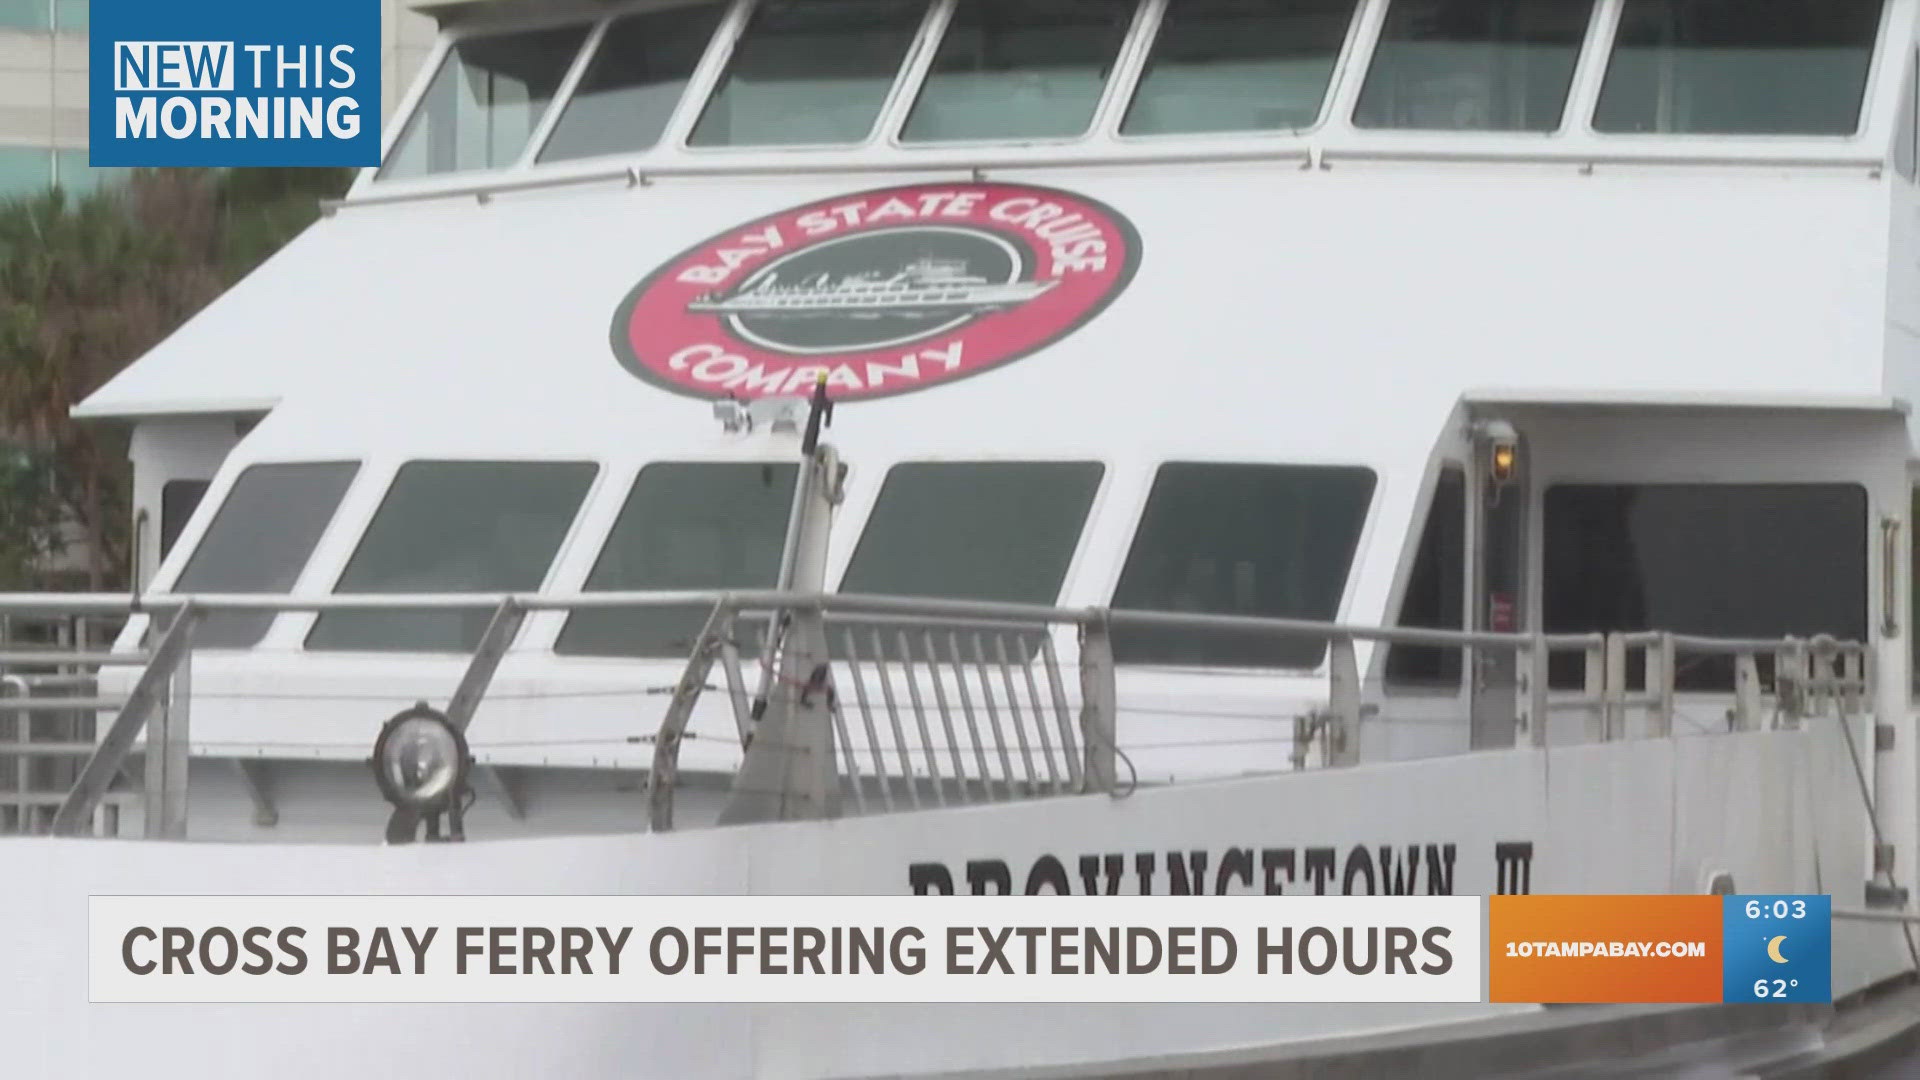 The Cross Bay Ferry announced they will run until 30 minutes after the final whistle throughout the playoffs.